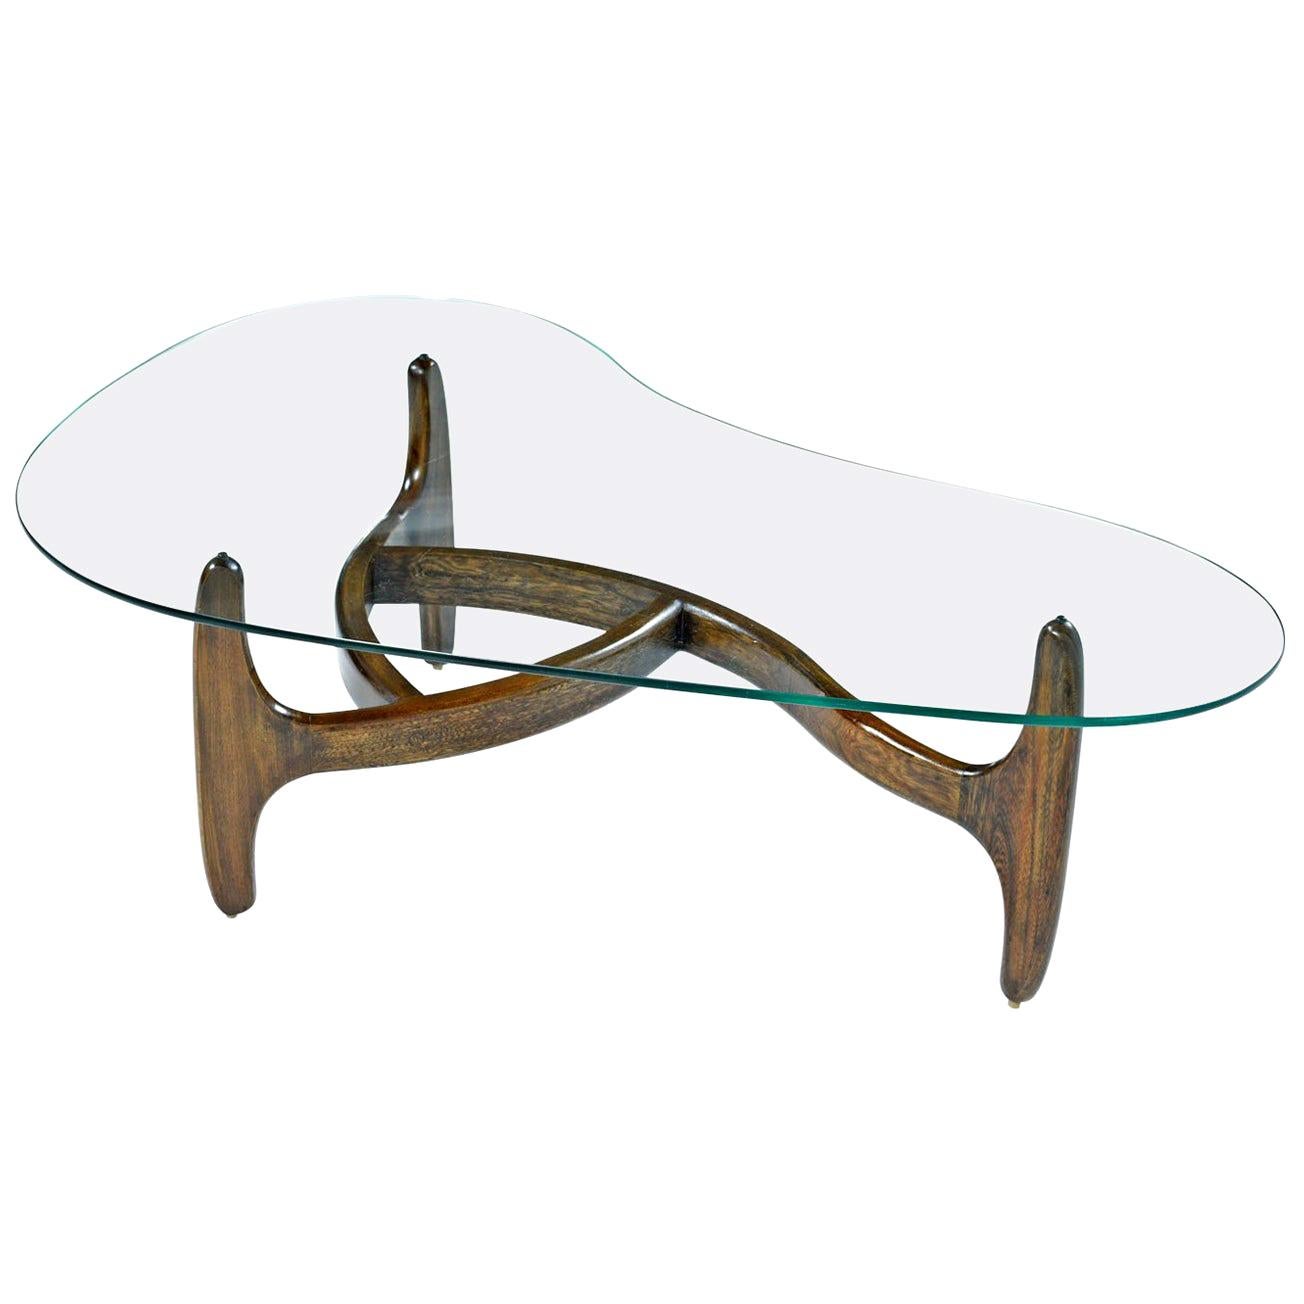 Solid Oak Base Amorphic Kidney Bean Adrian Pearsall Coffee Table with New Glass